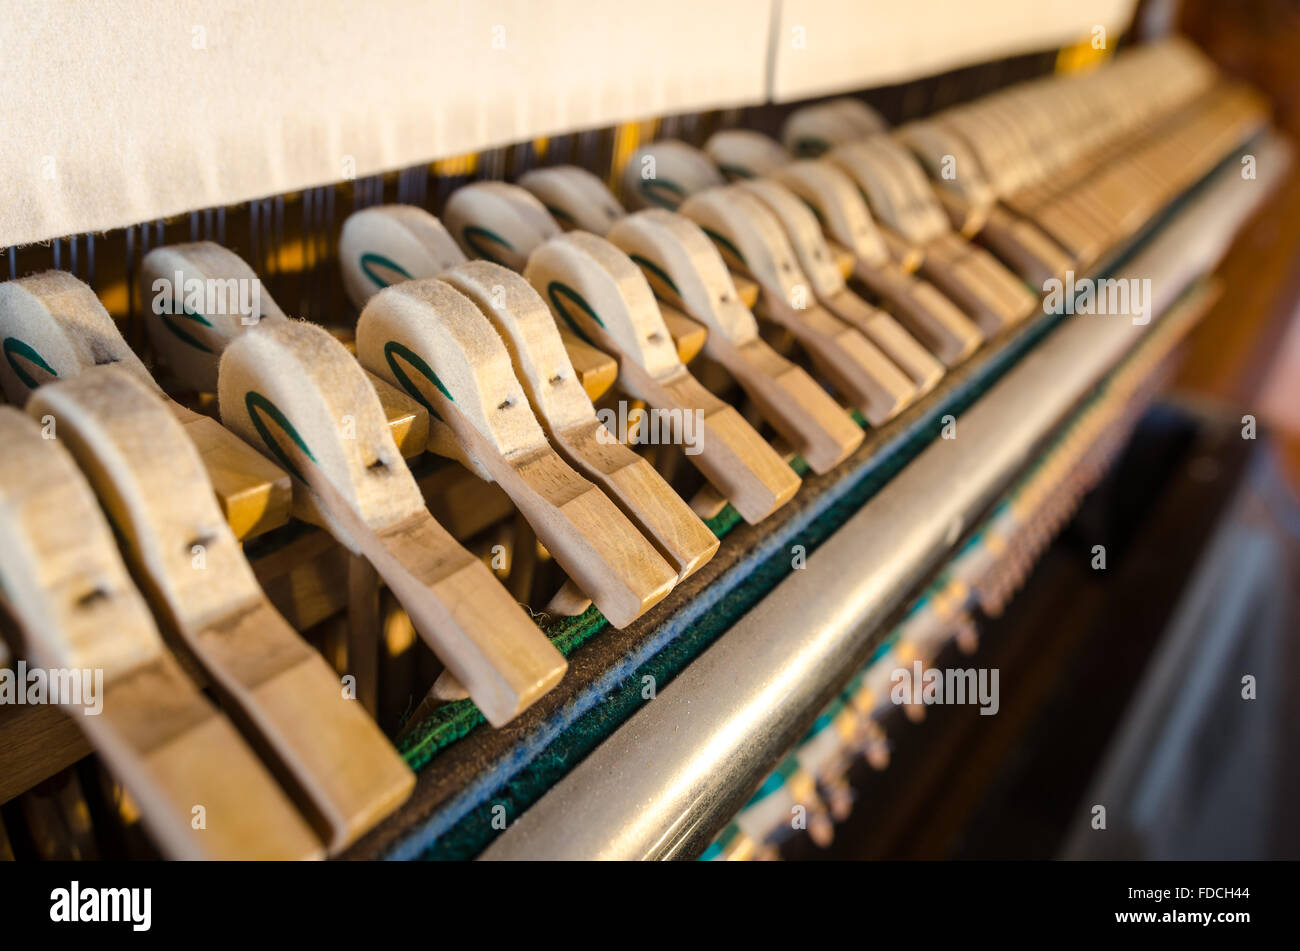 Upright piano hammers detail Stock Photo